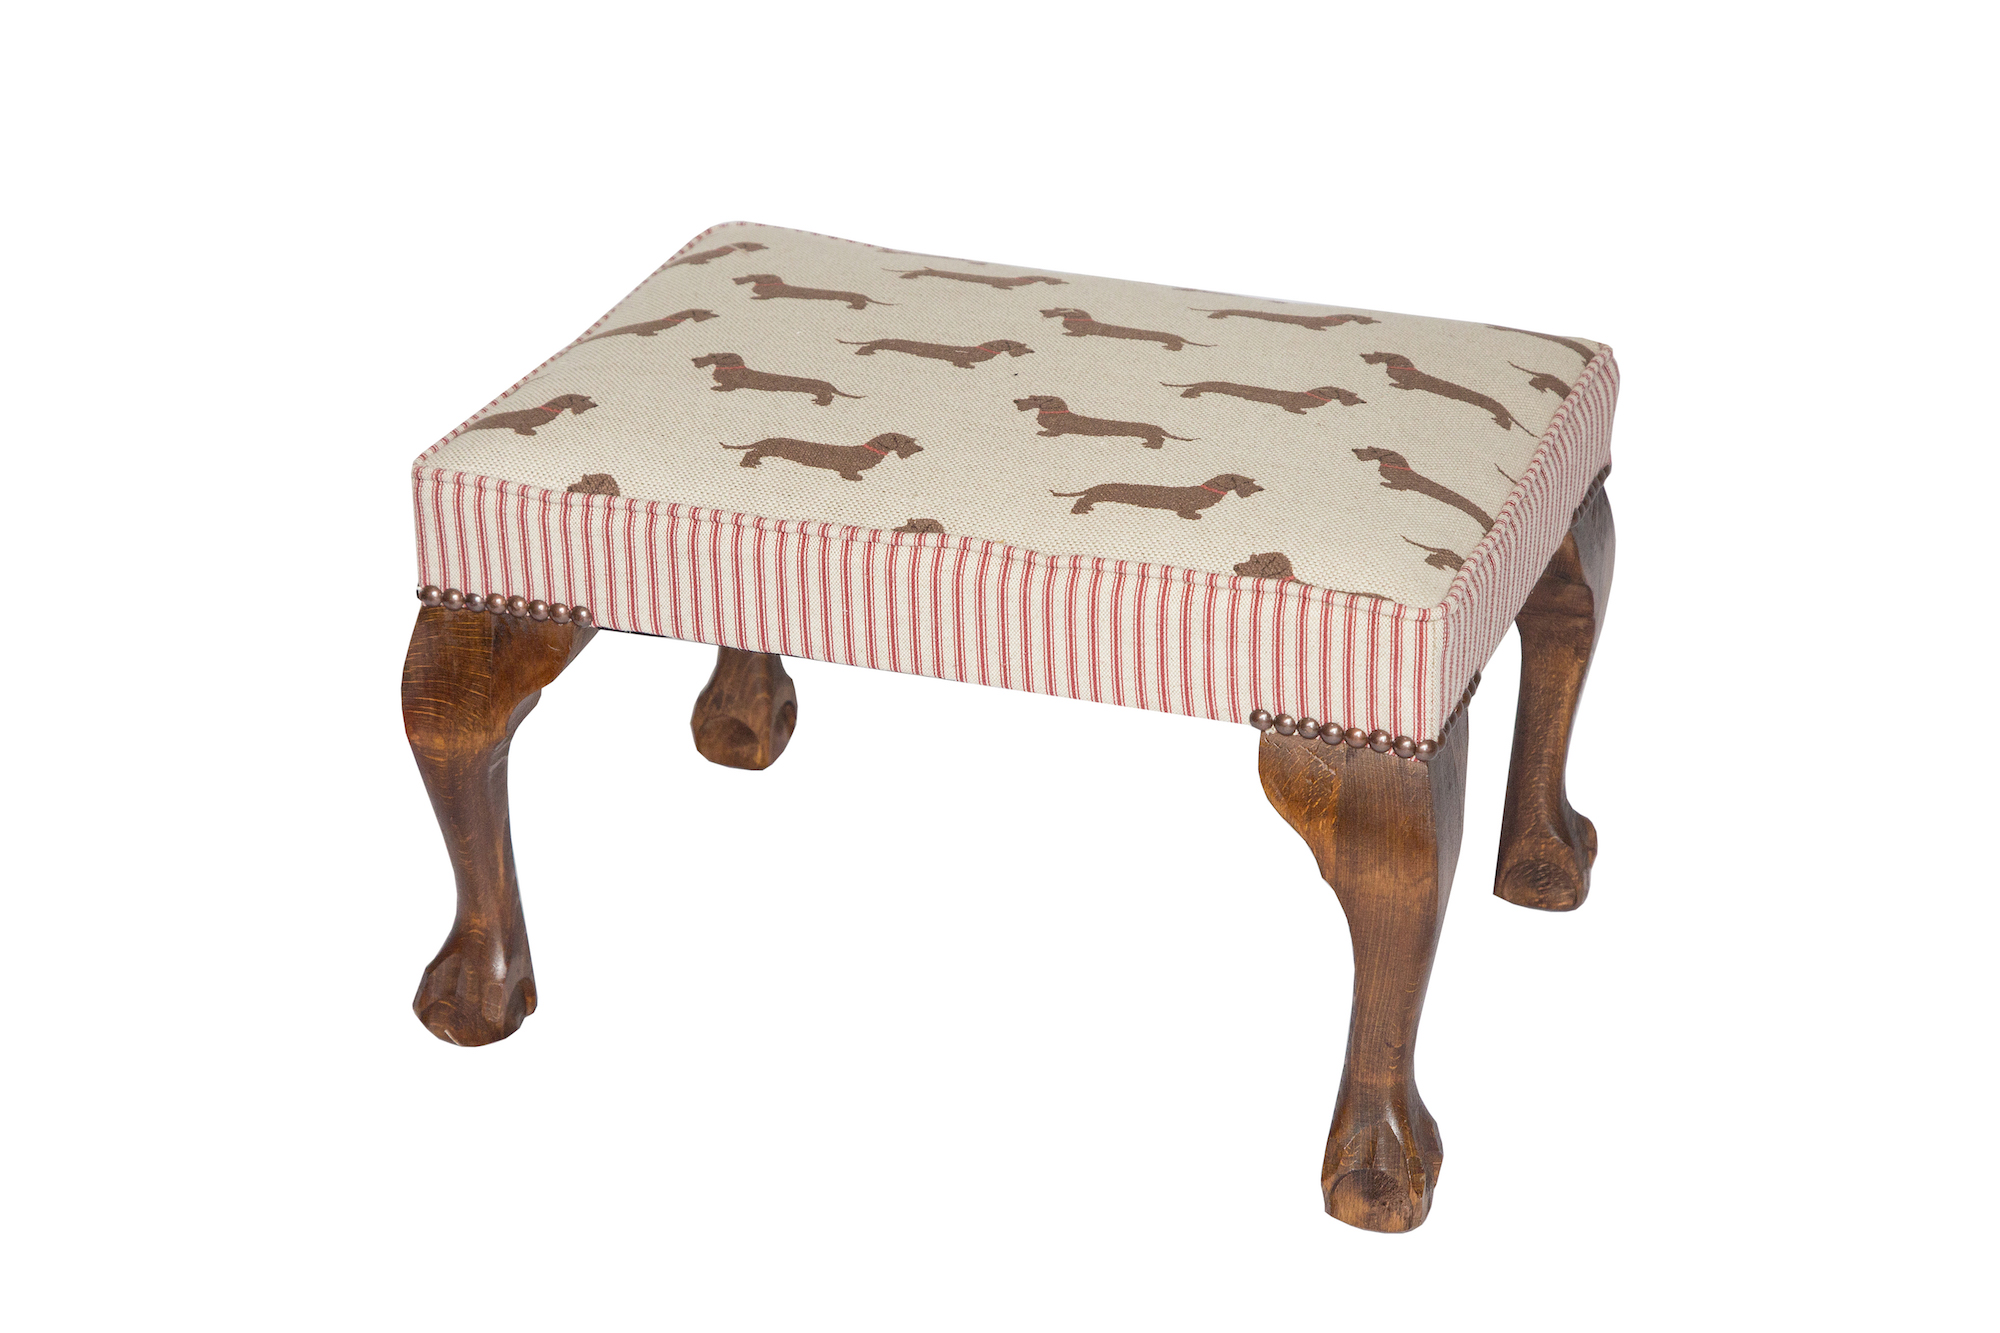 Doggy Footstool with Contrast Ticking